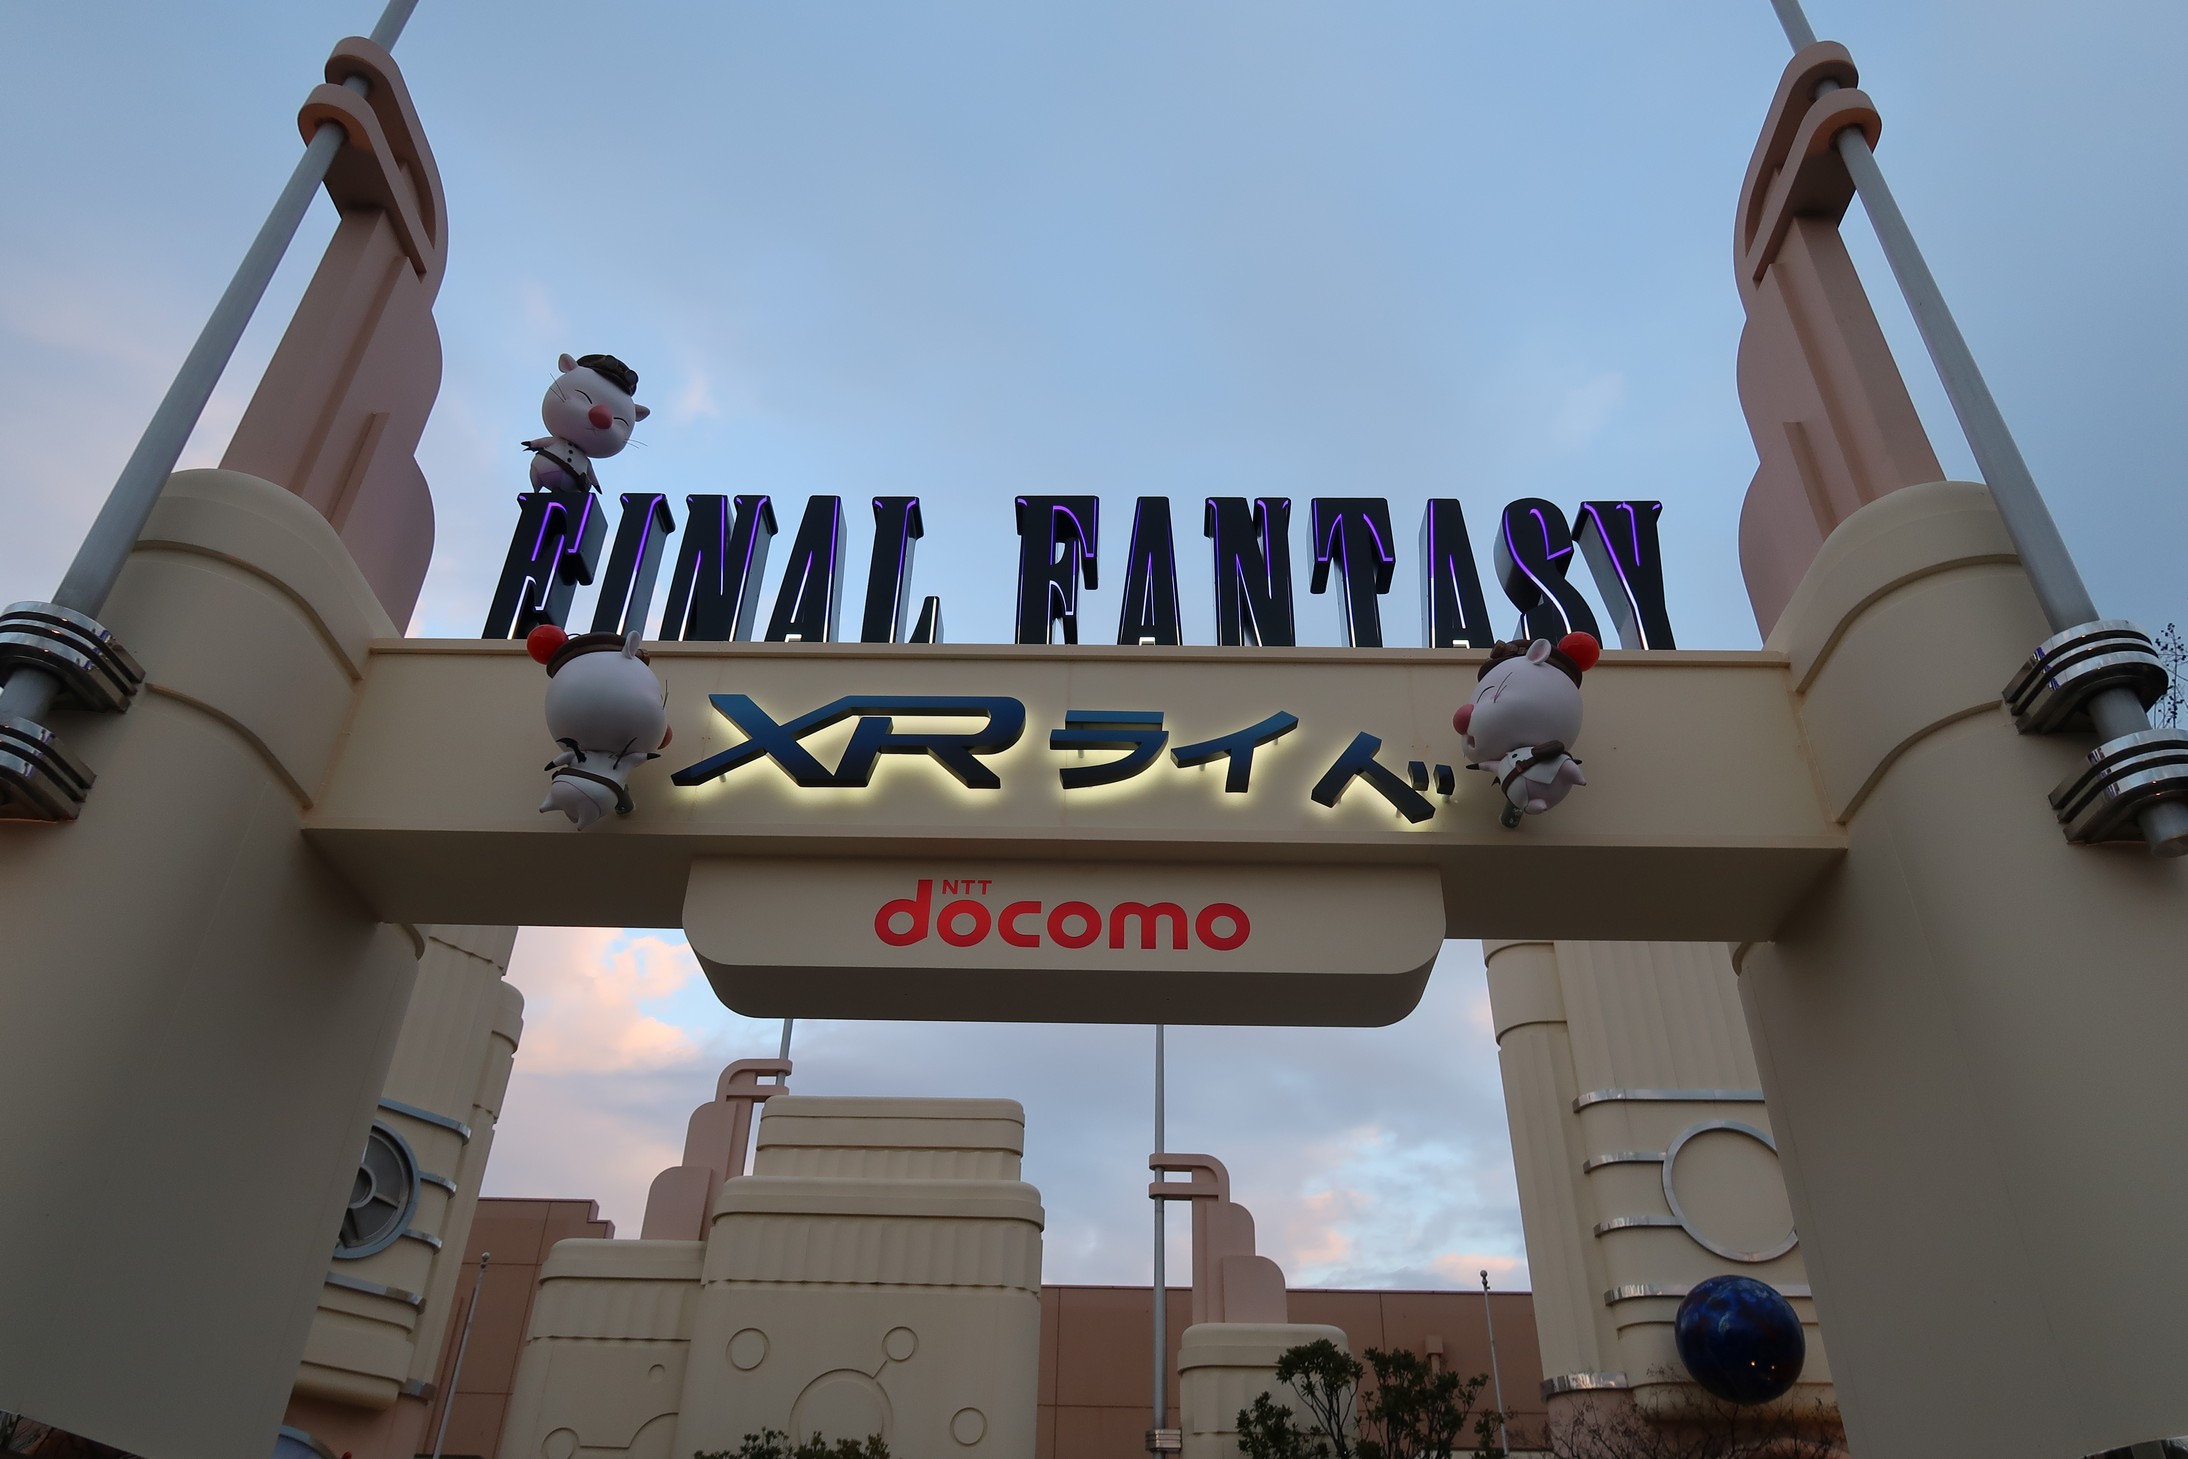 Checking Out Cool Japan 18 And Final Fantasy Xr Ride At Universal Studios Japan Inside Universal